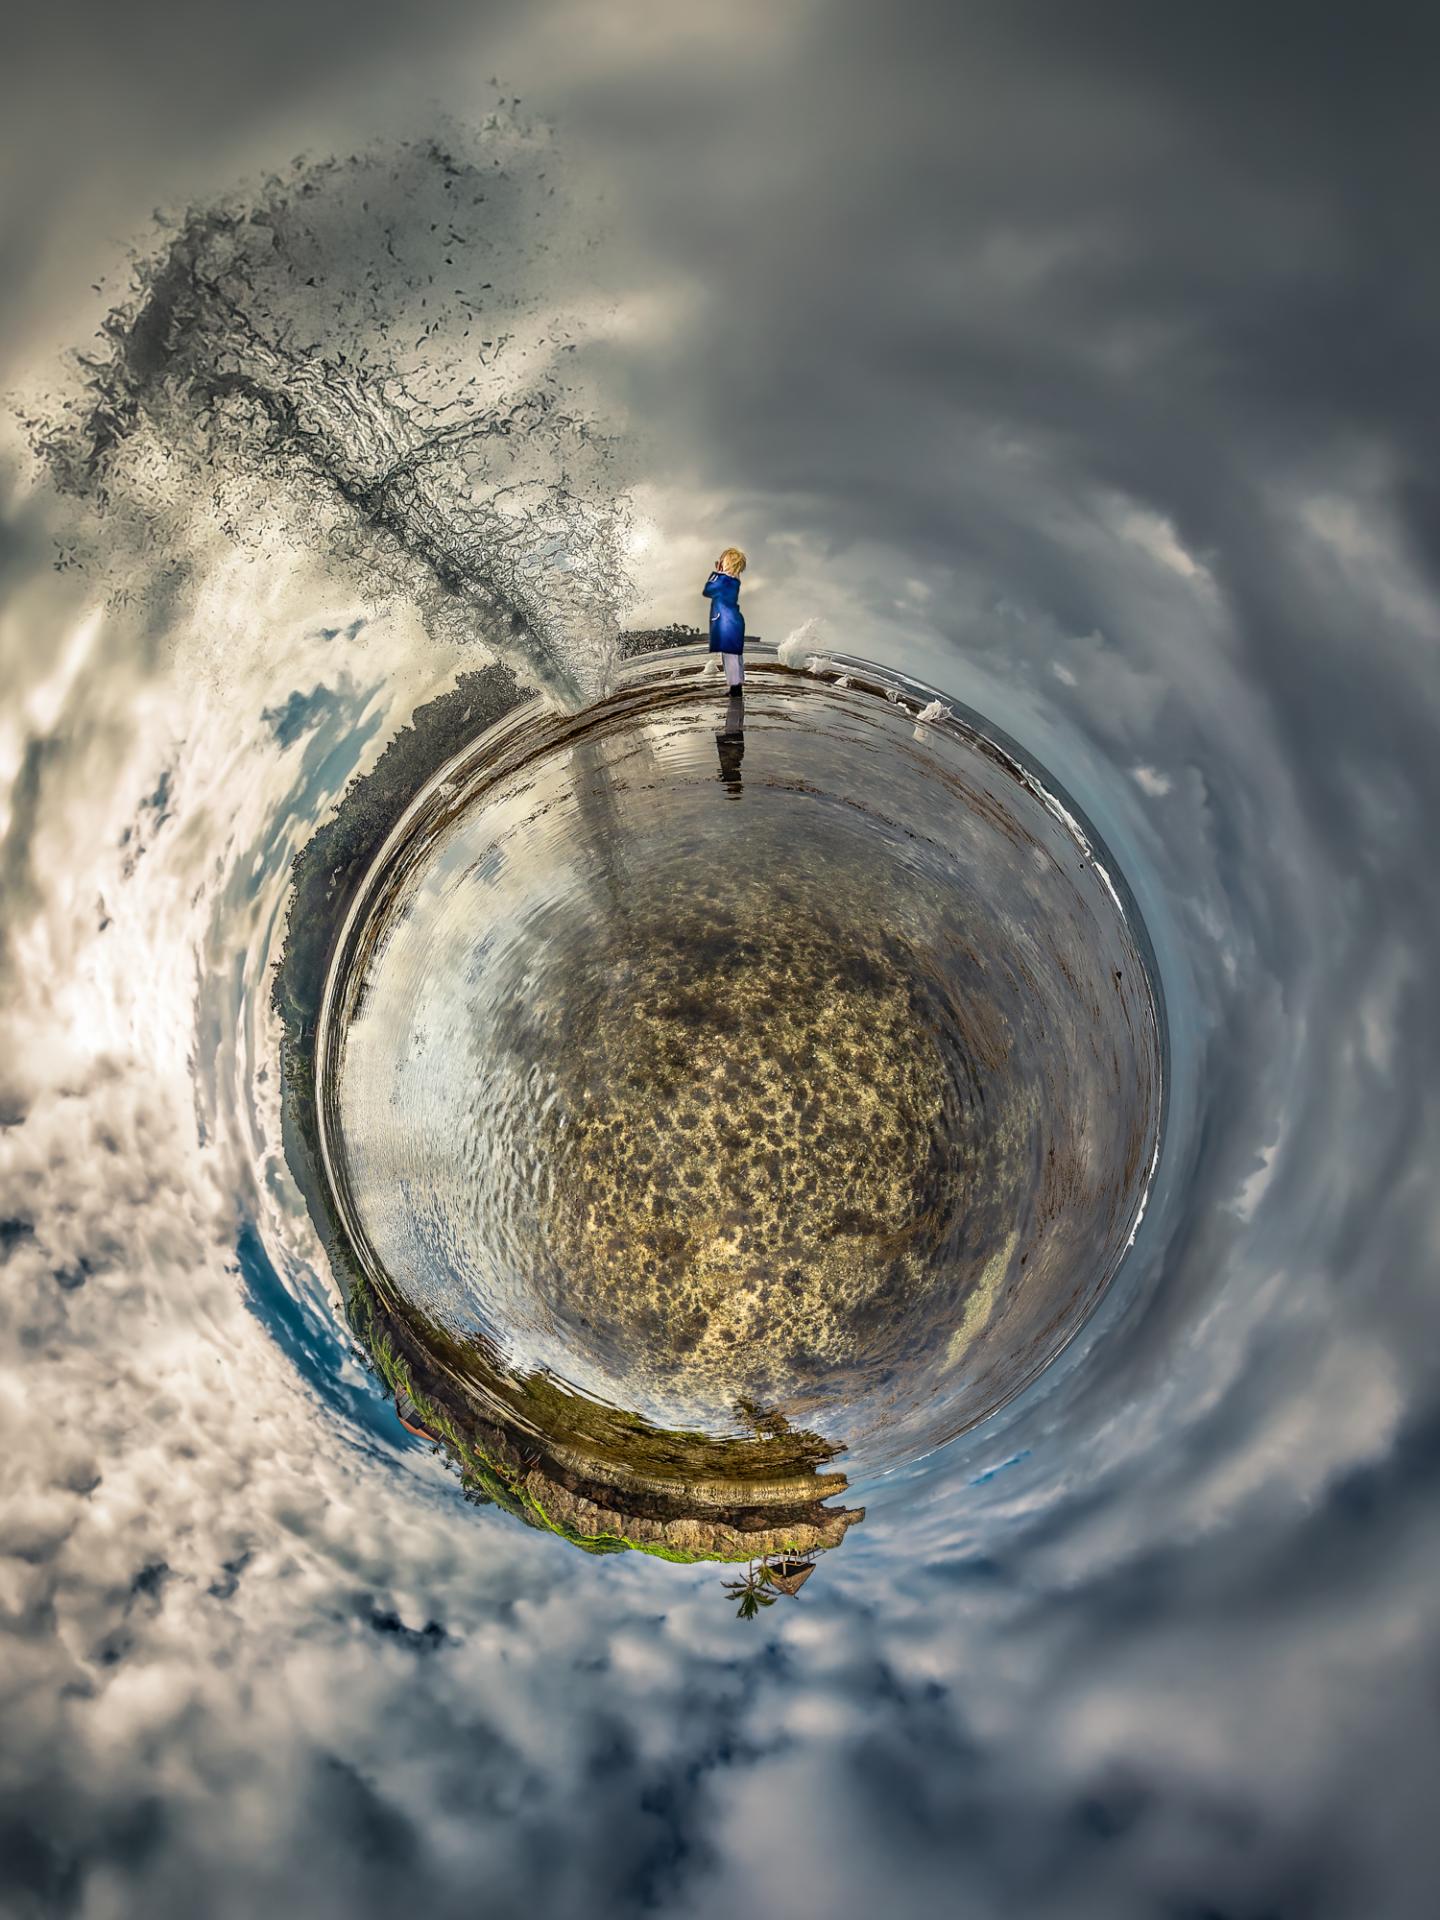 London Photography Awards Winner - Planets of a Tiny Prince